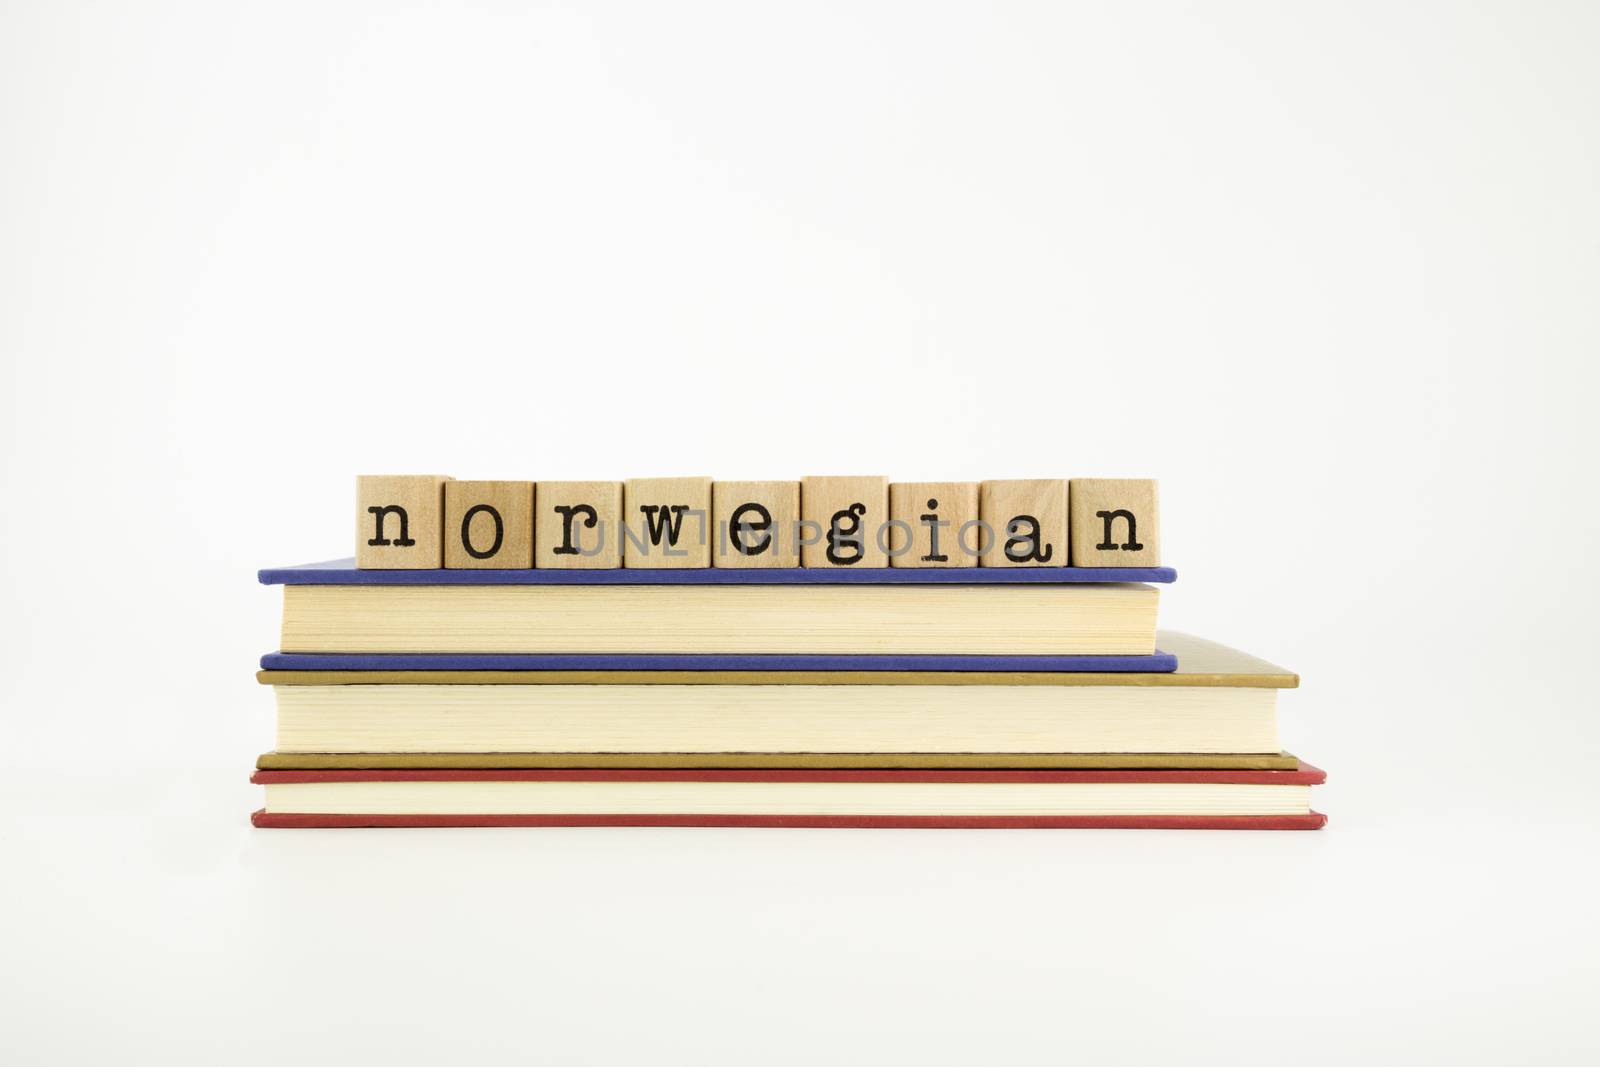 norwegain word on wood stamps stack on books, language and conversation concept